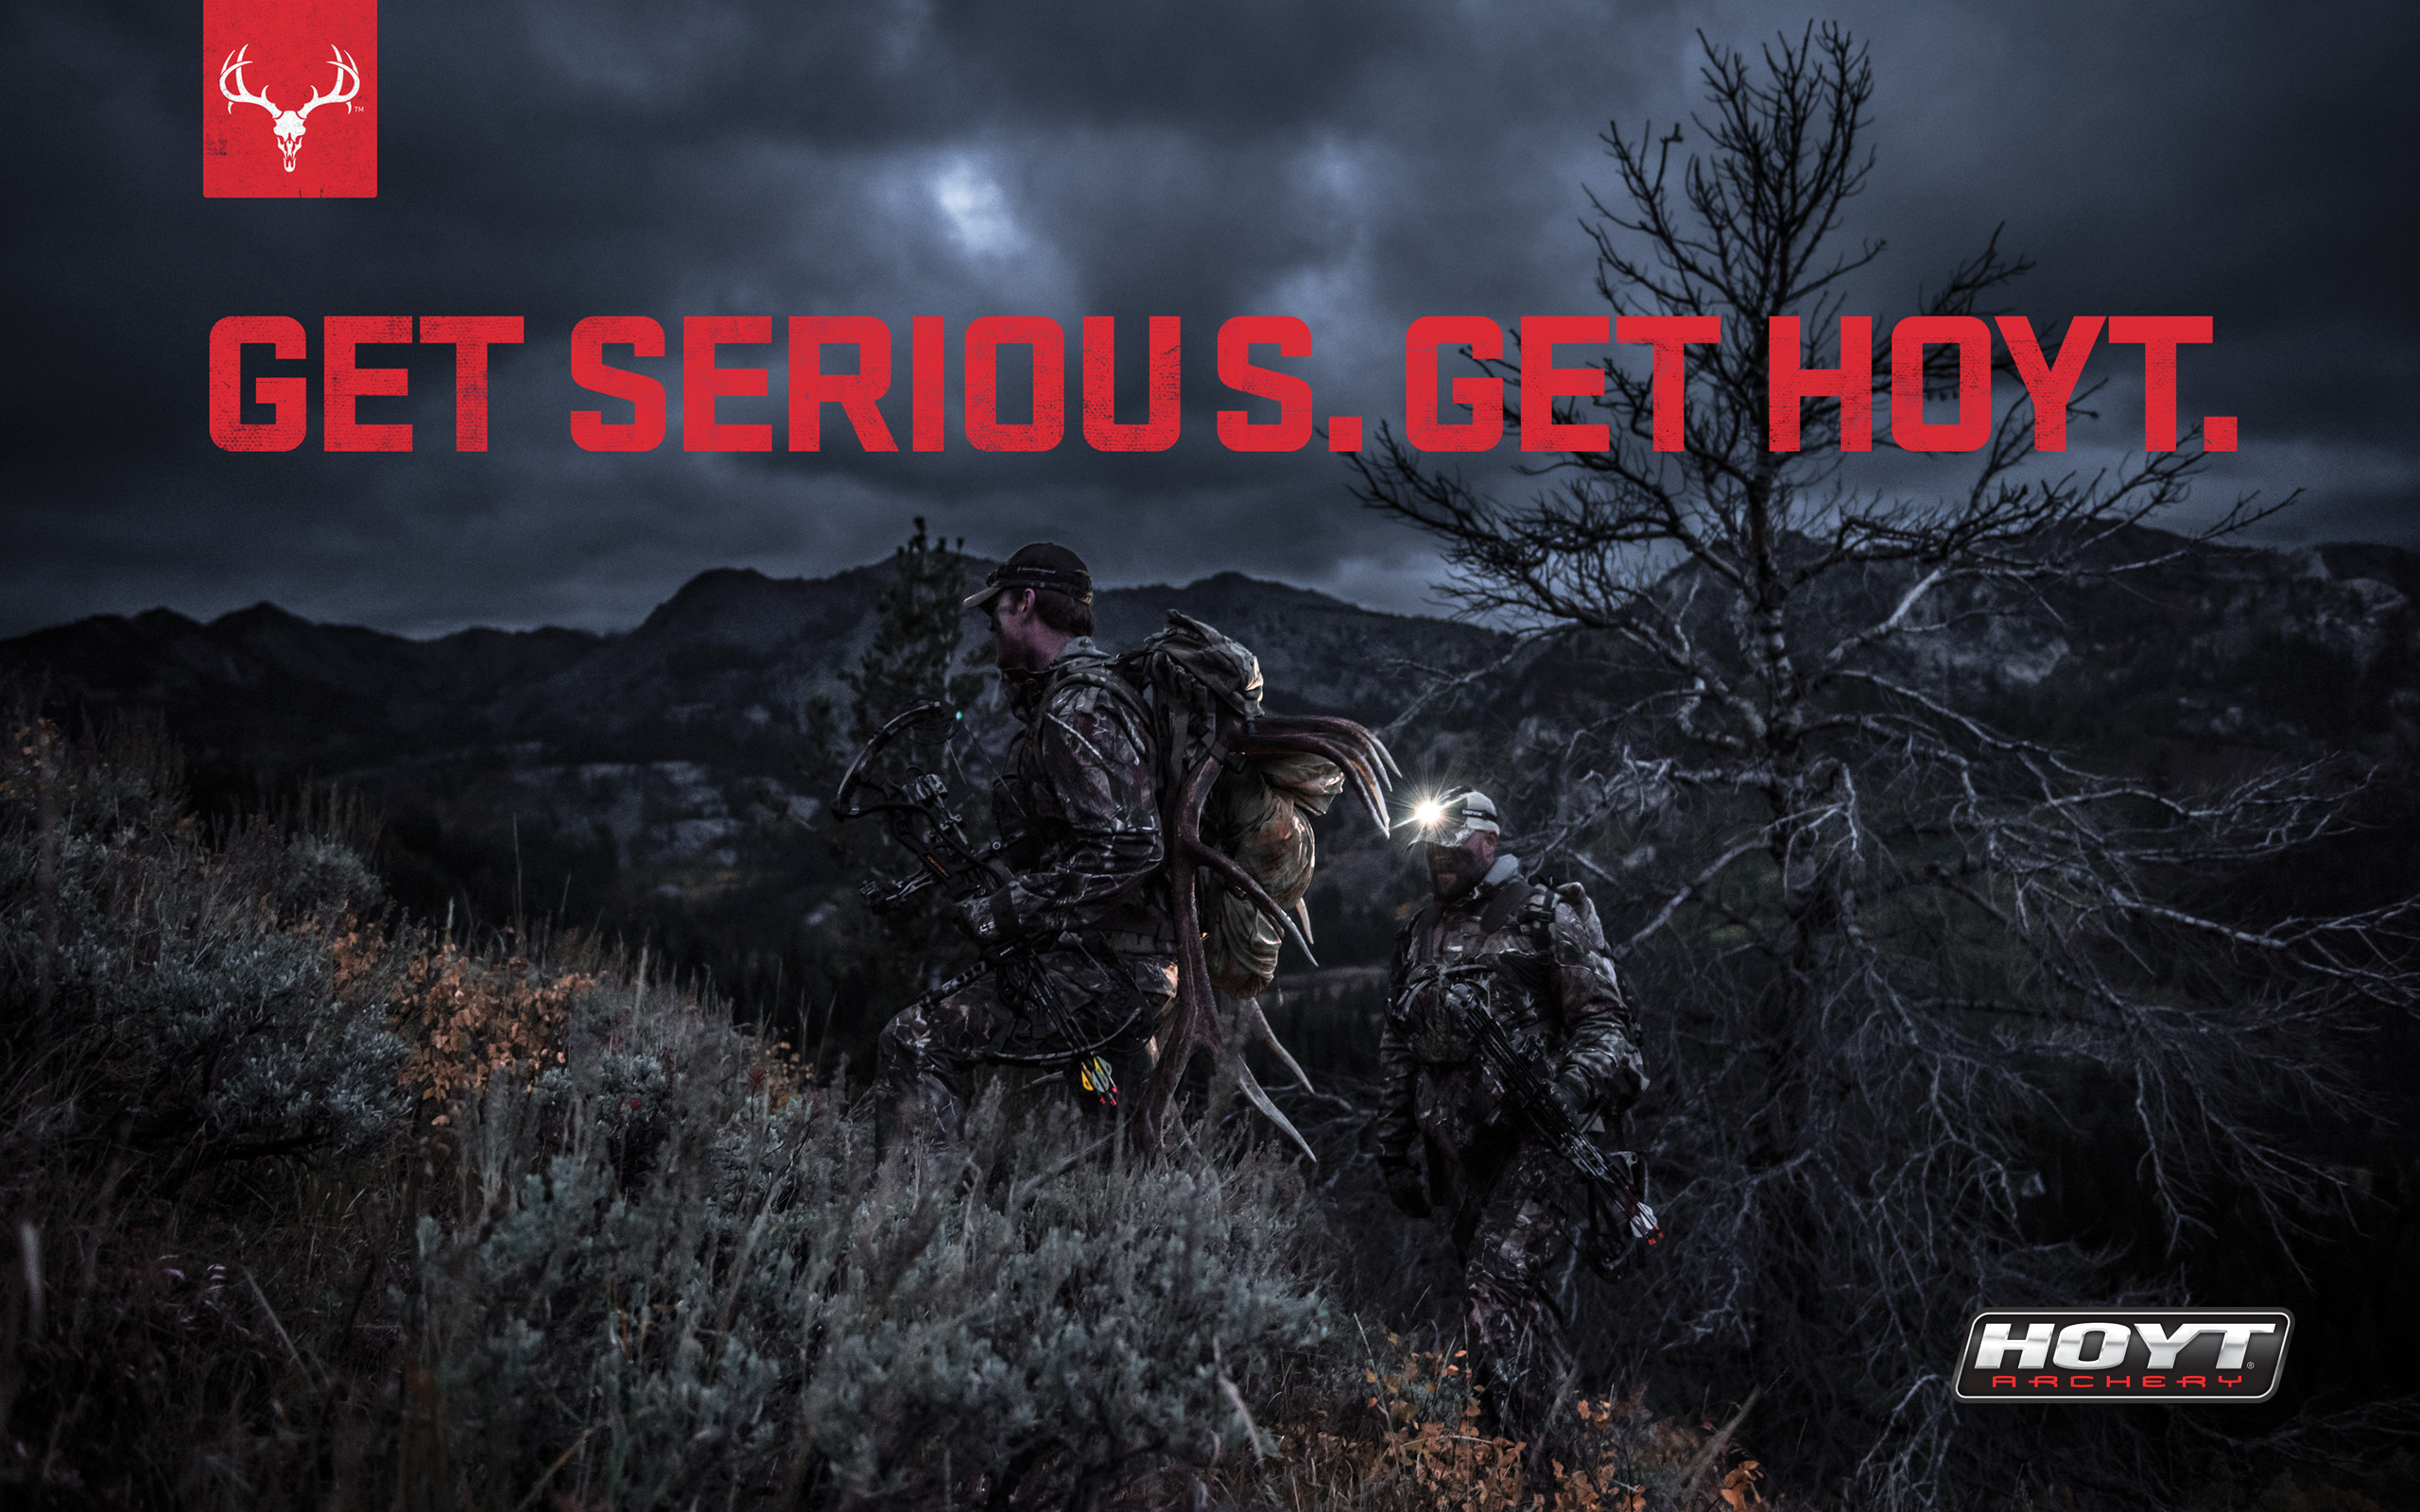 Bowhunting wallpaper ignite wallpaper get serious get hoyt traditional